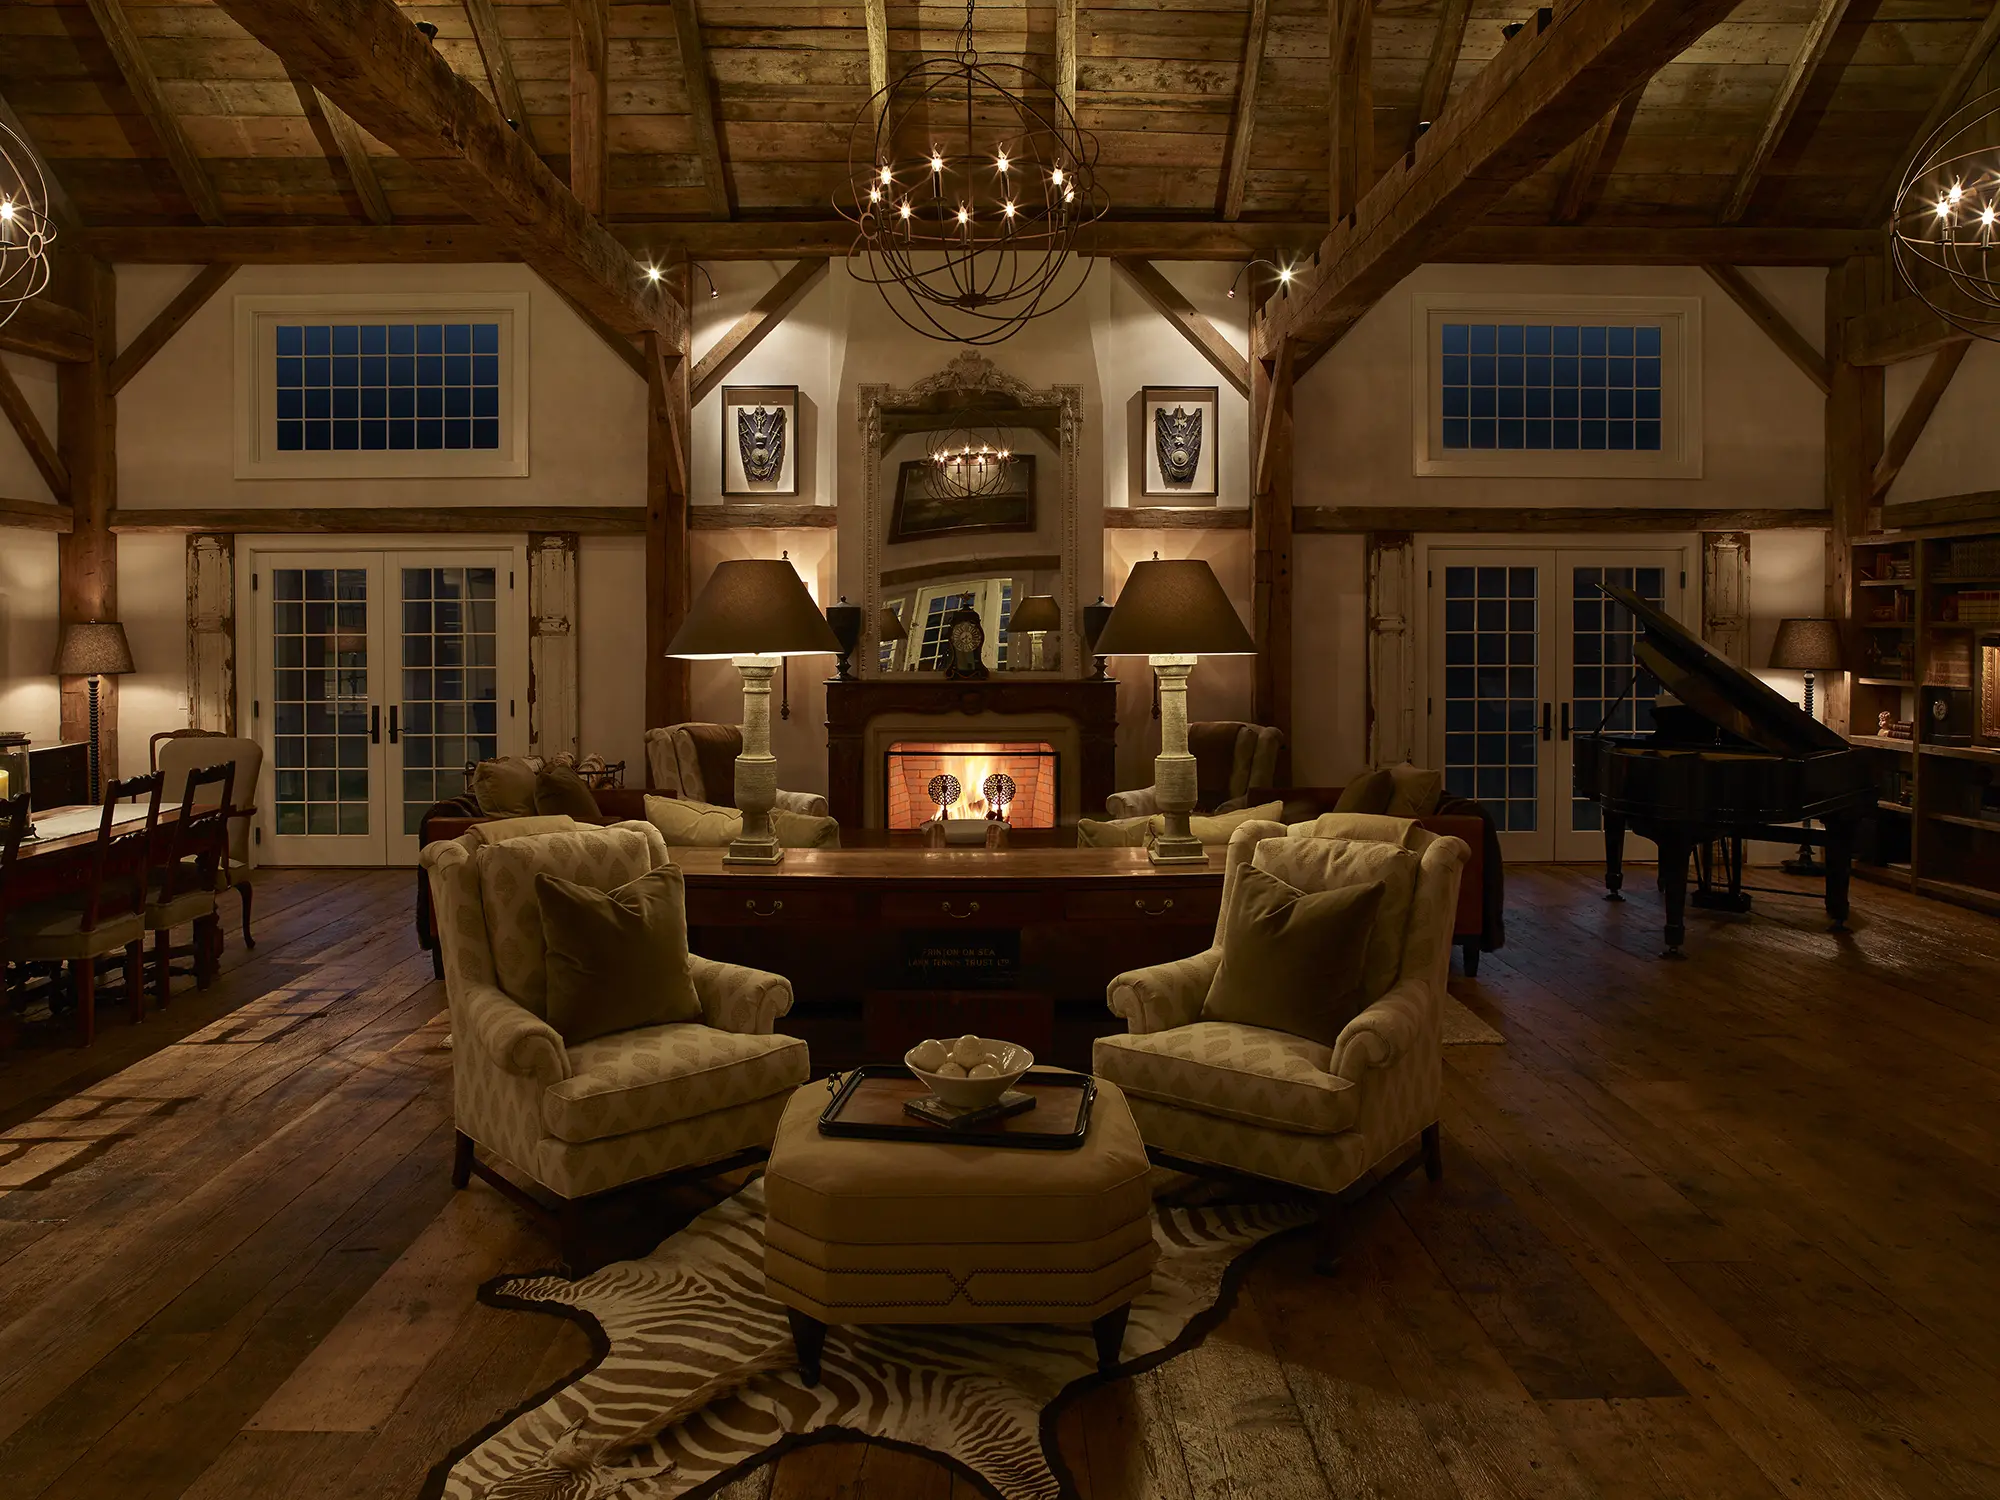 View of the spacious living area showing exposed beams and large fireplace